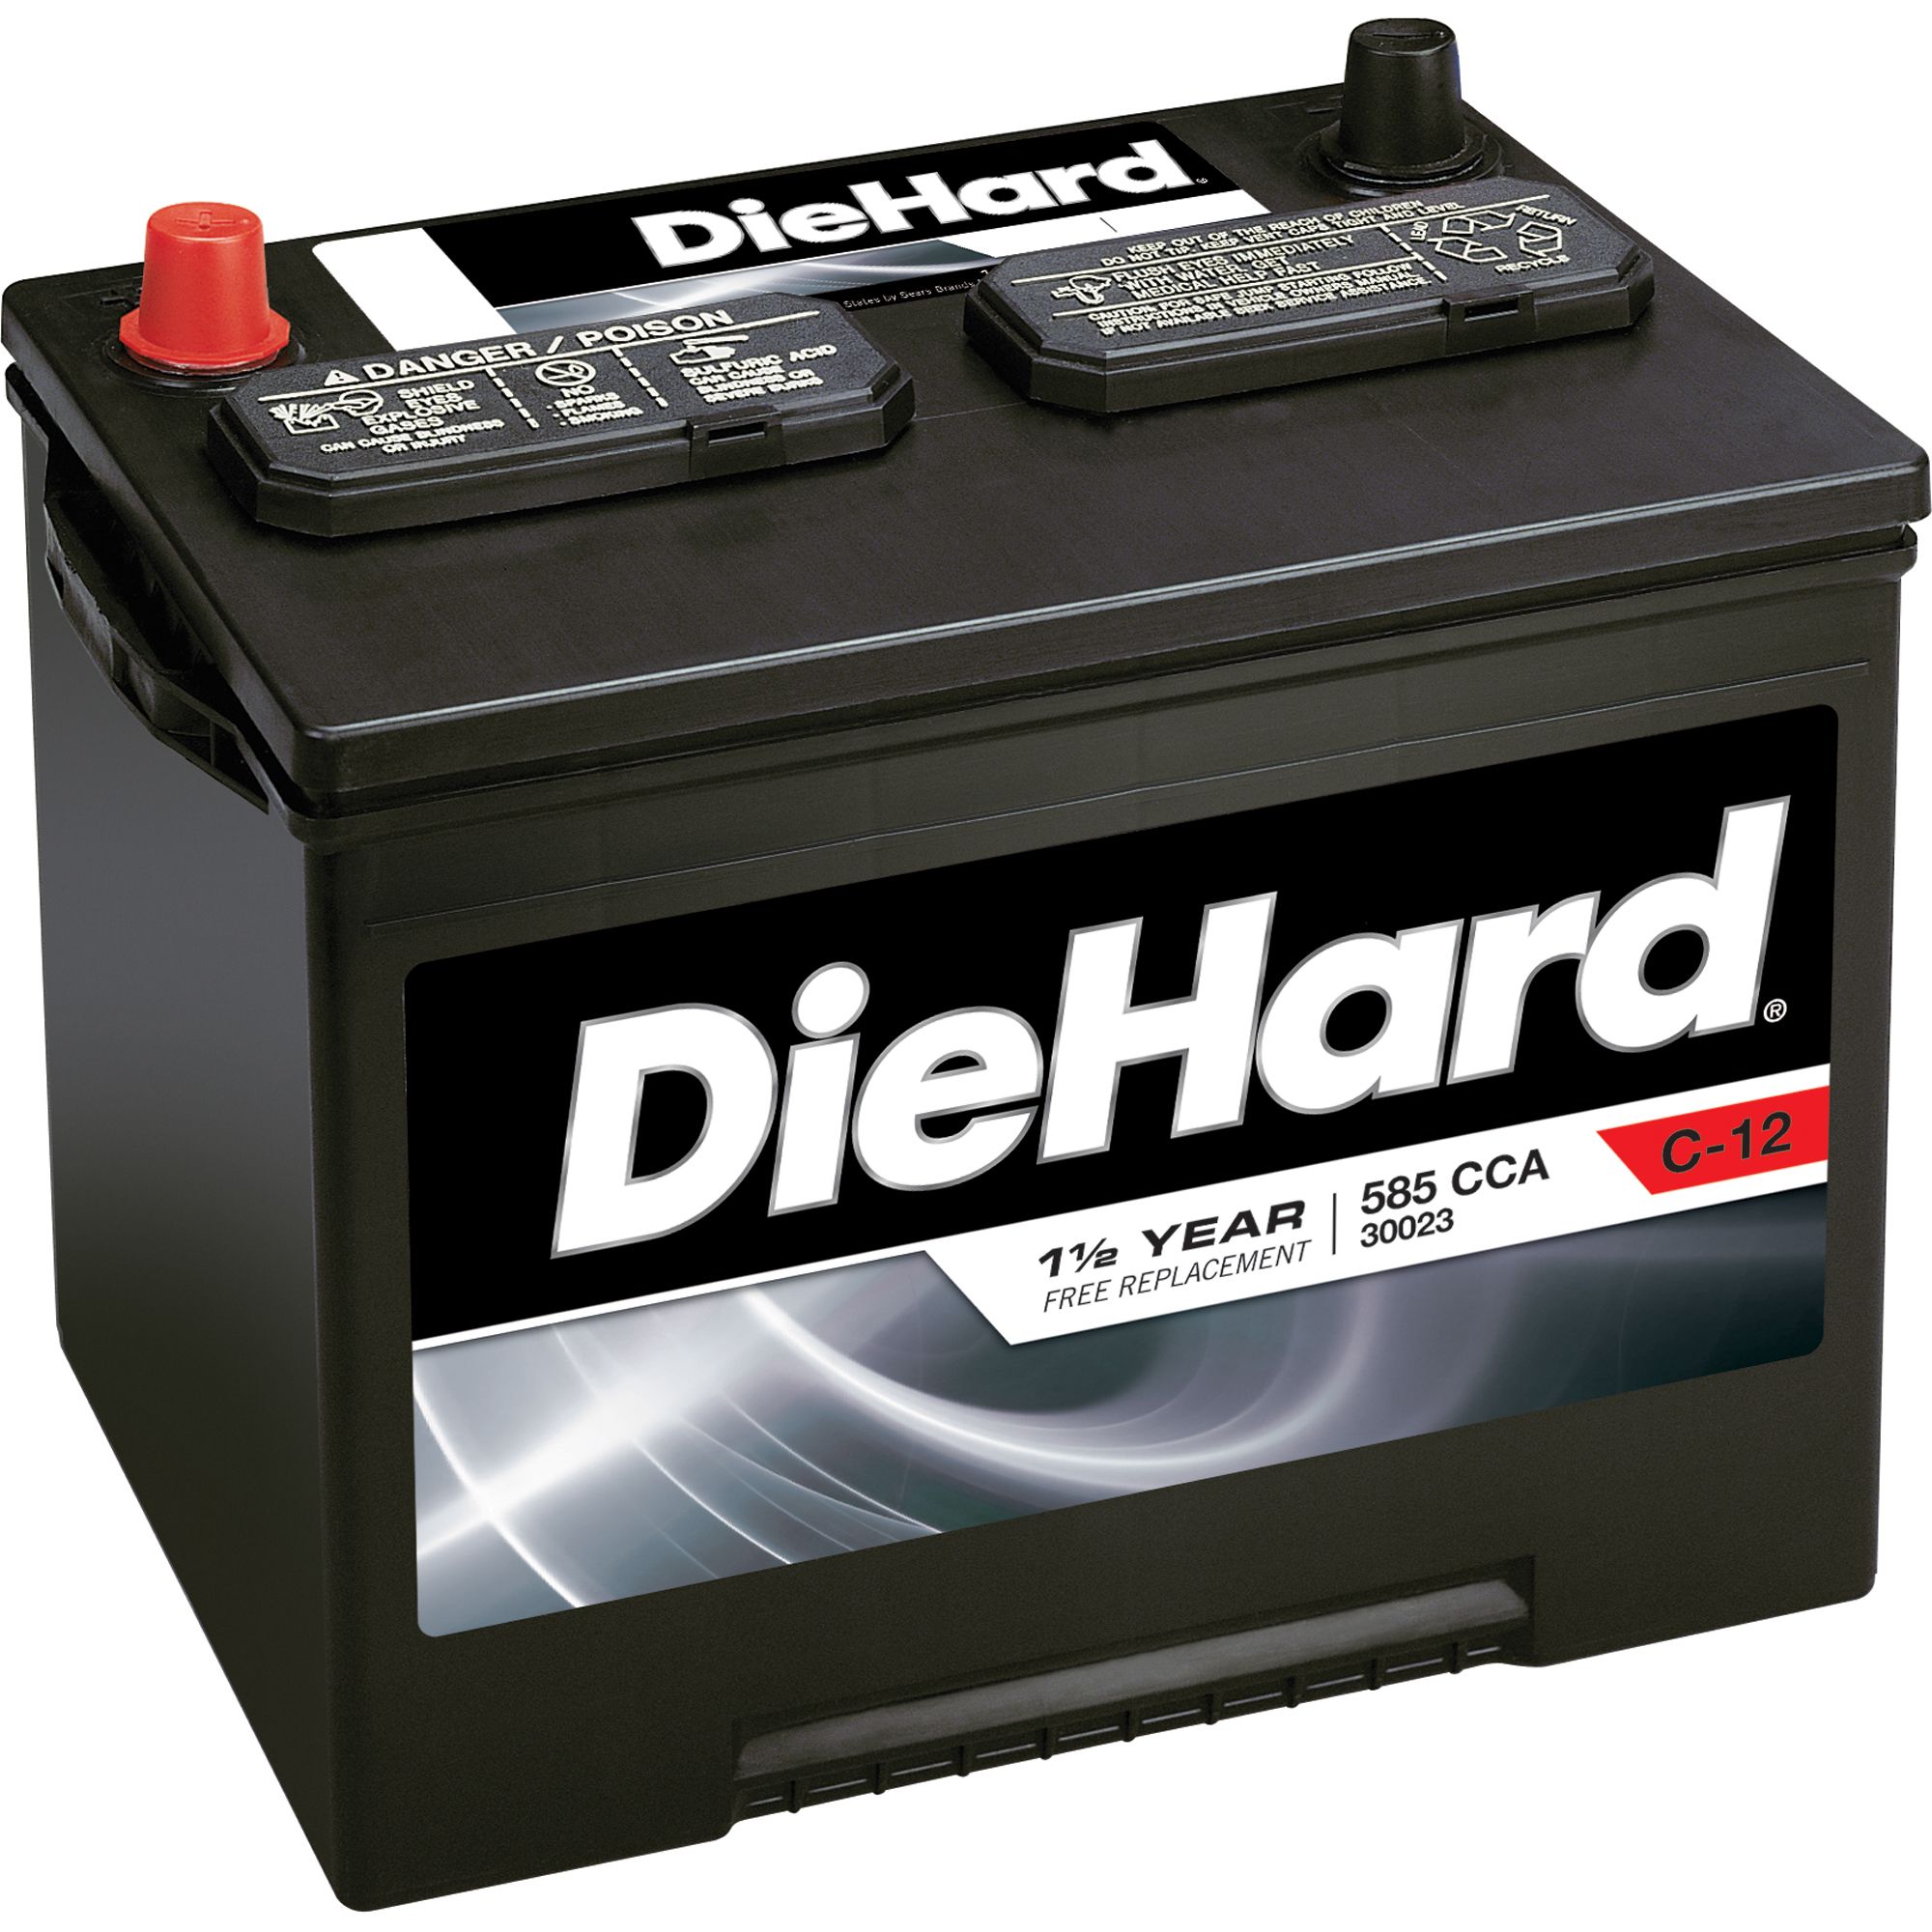 Die Hard Battery Group Size Chart